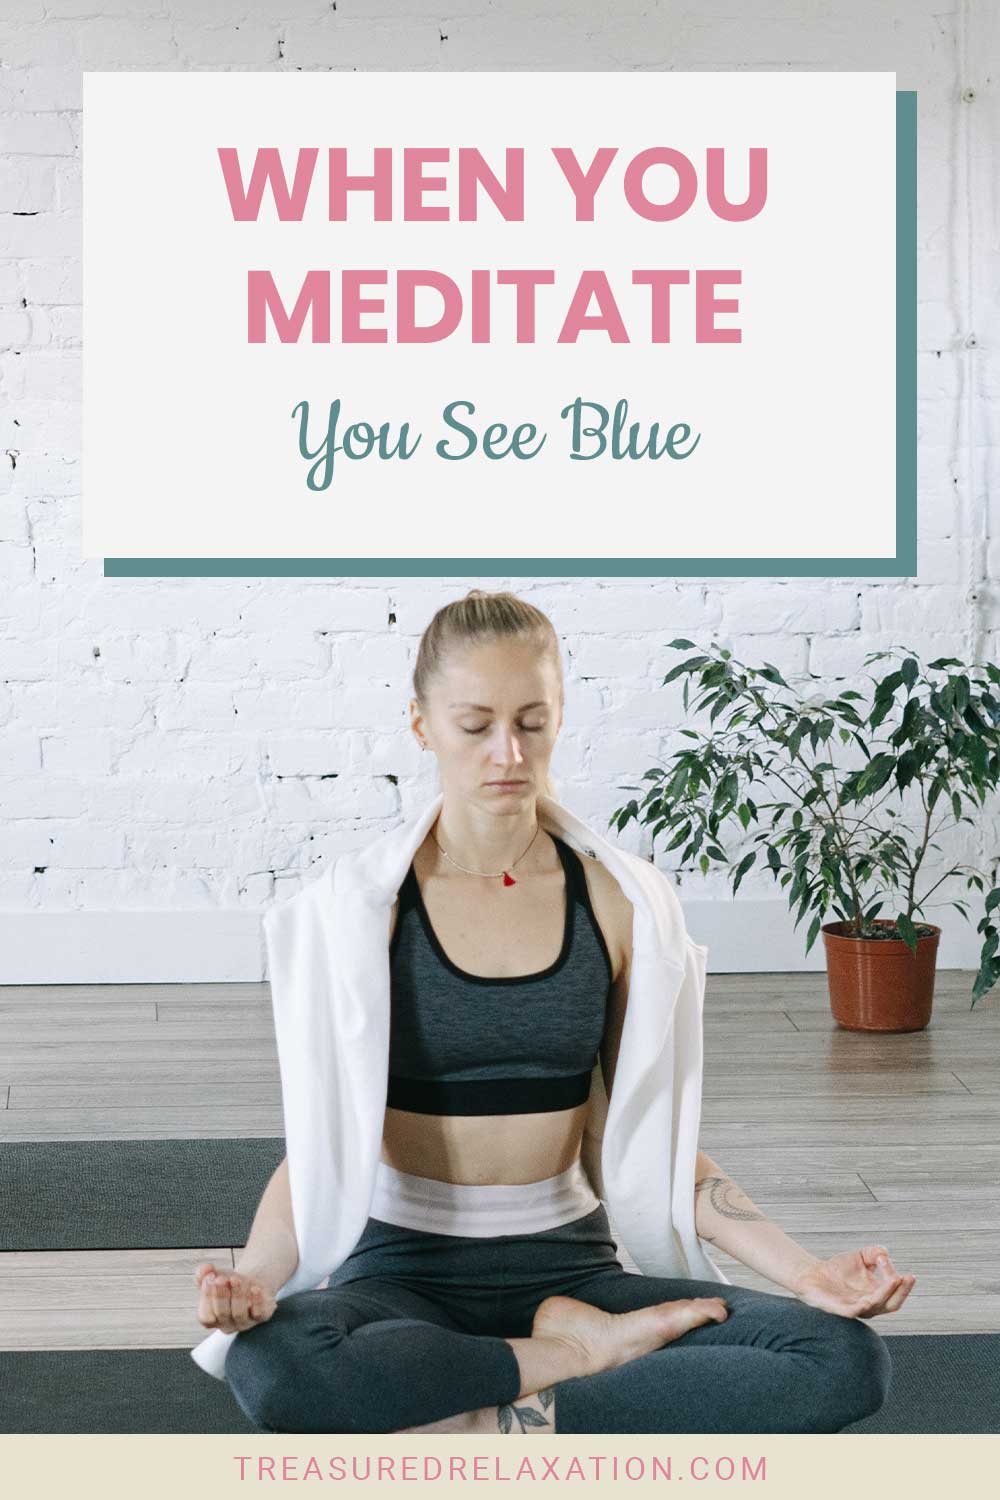 Woman meditating in a room with white walls - When You Meditate You See Blue?